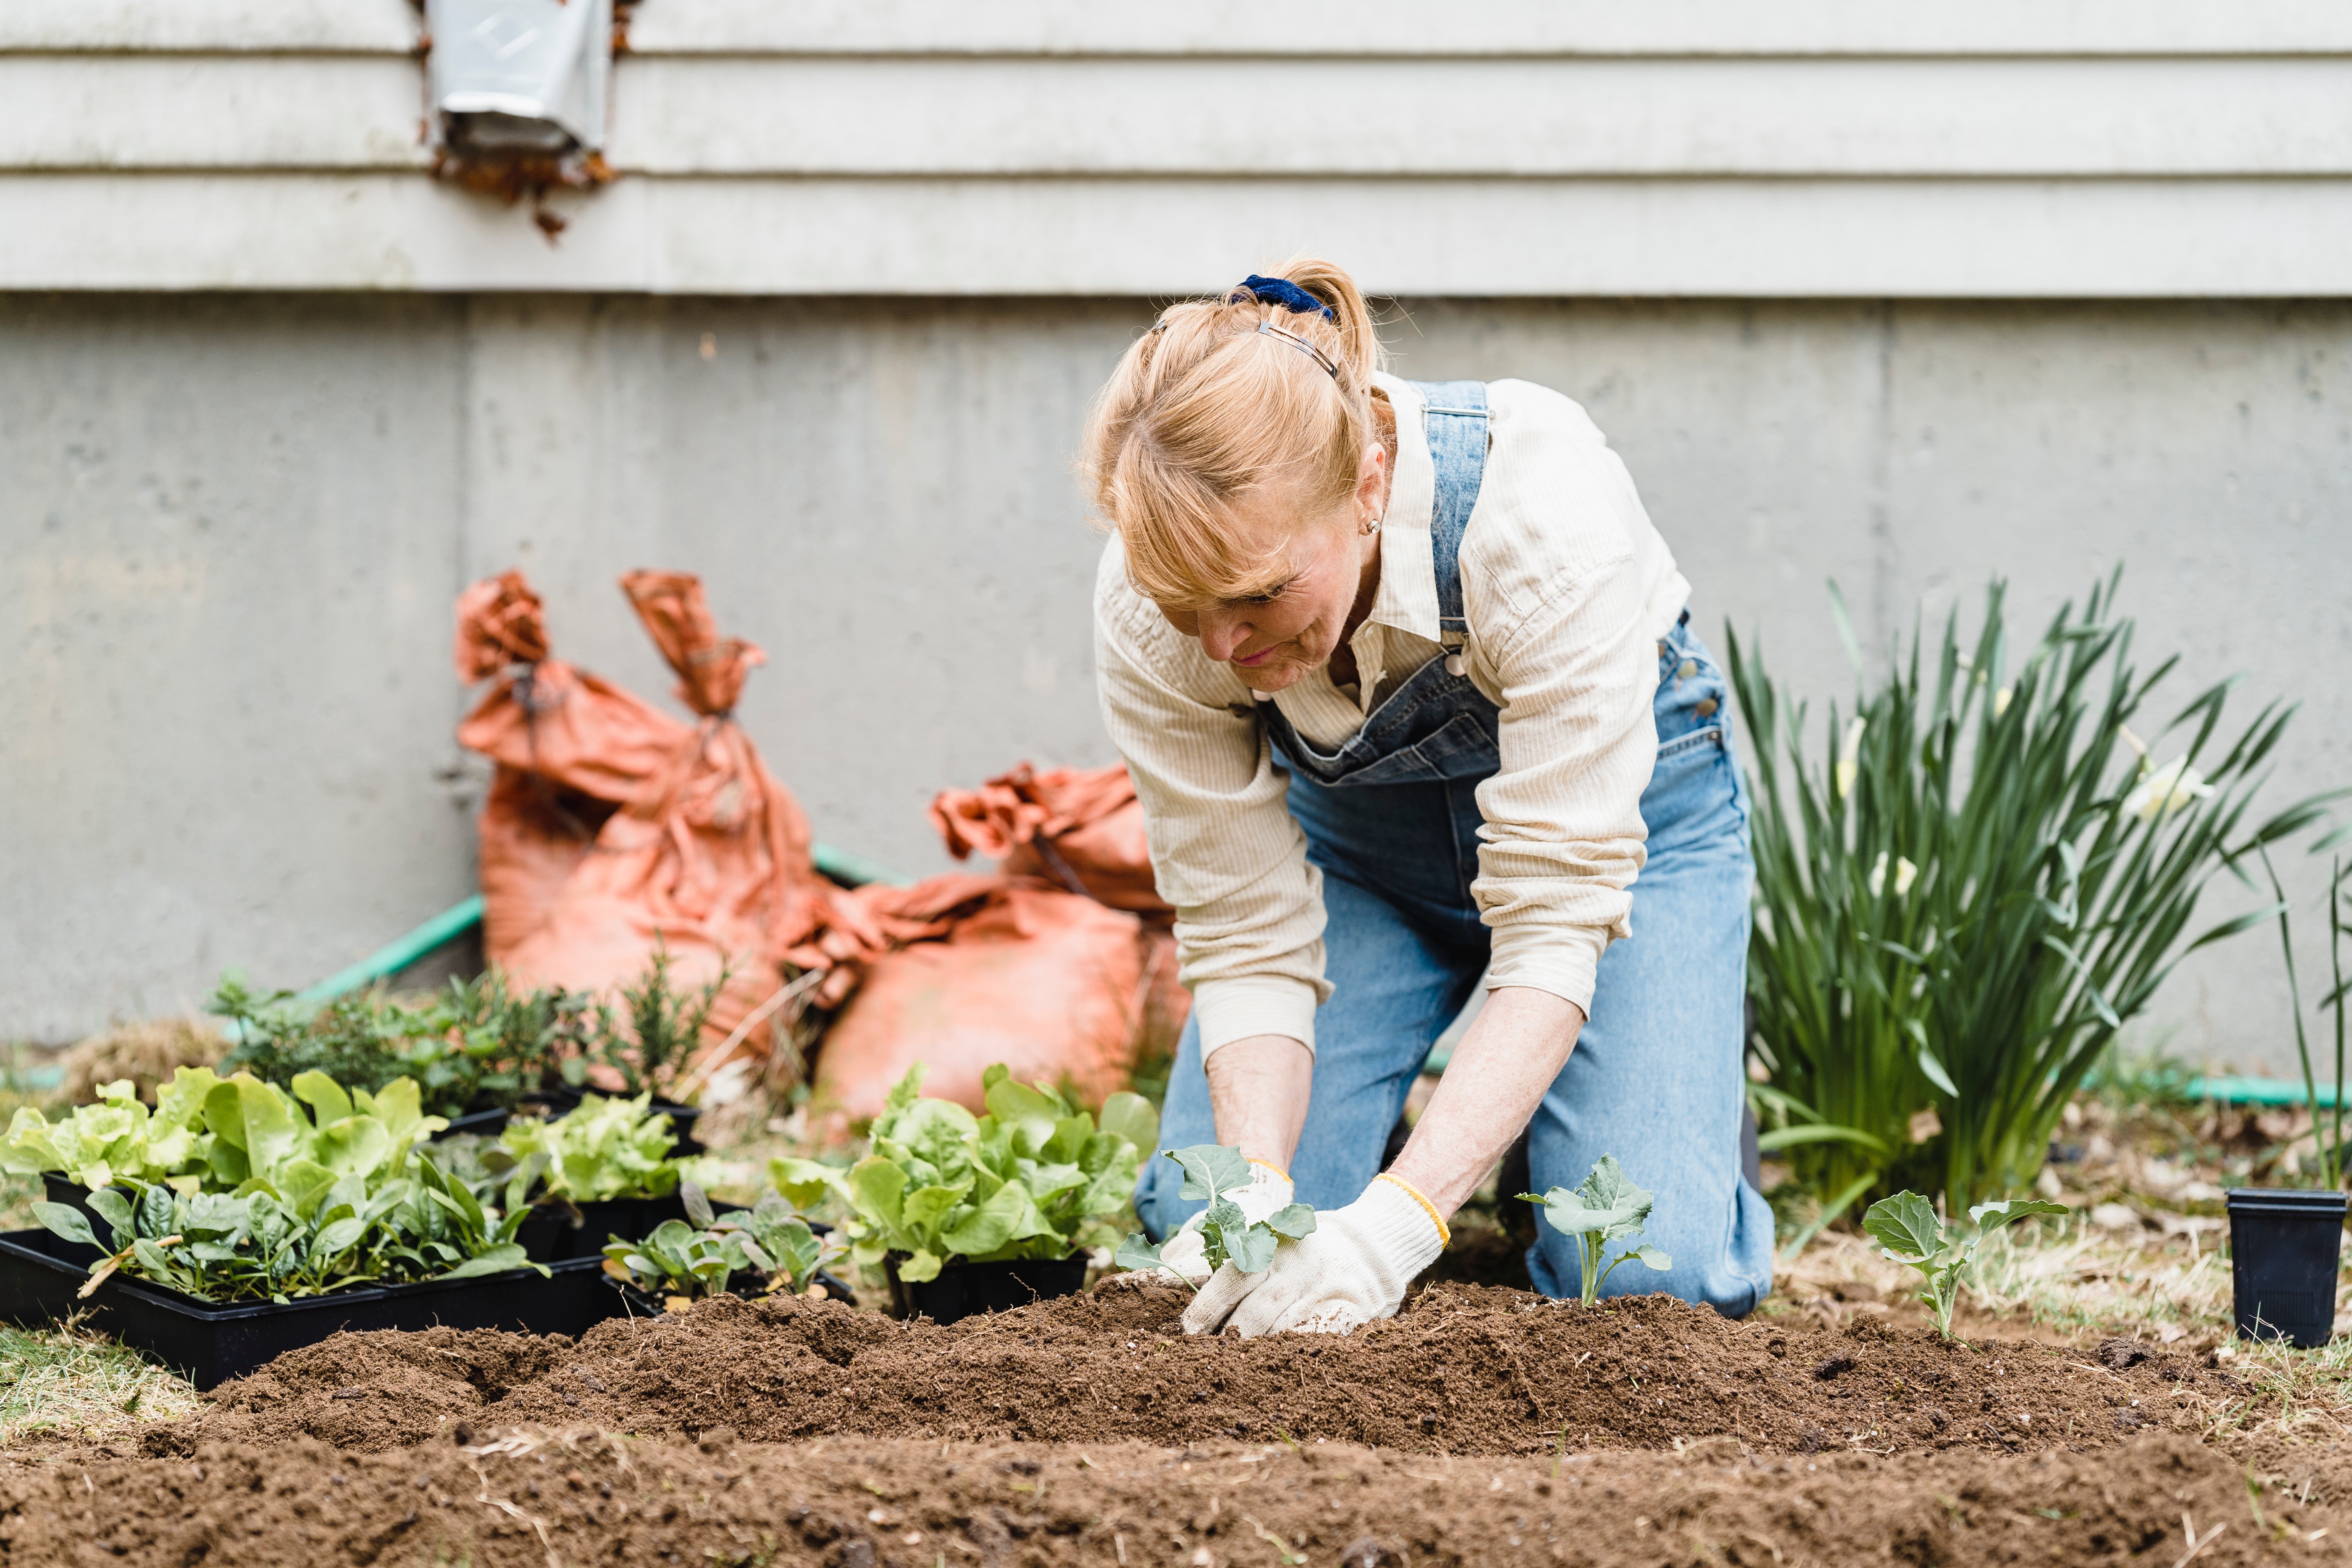 There\'s a woman who\'s gardening and planting some plants.